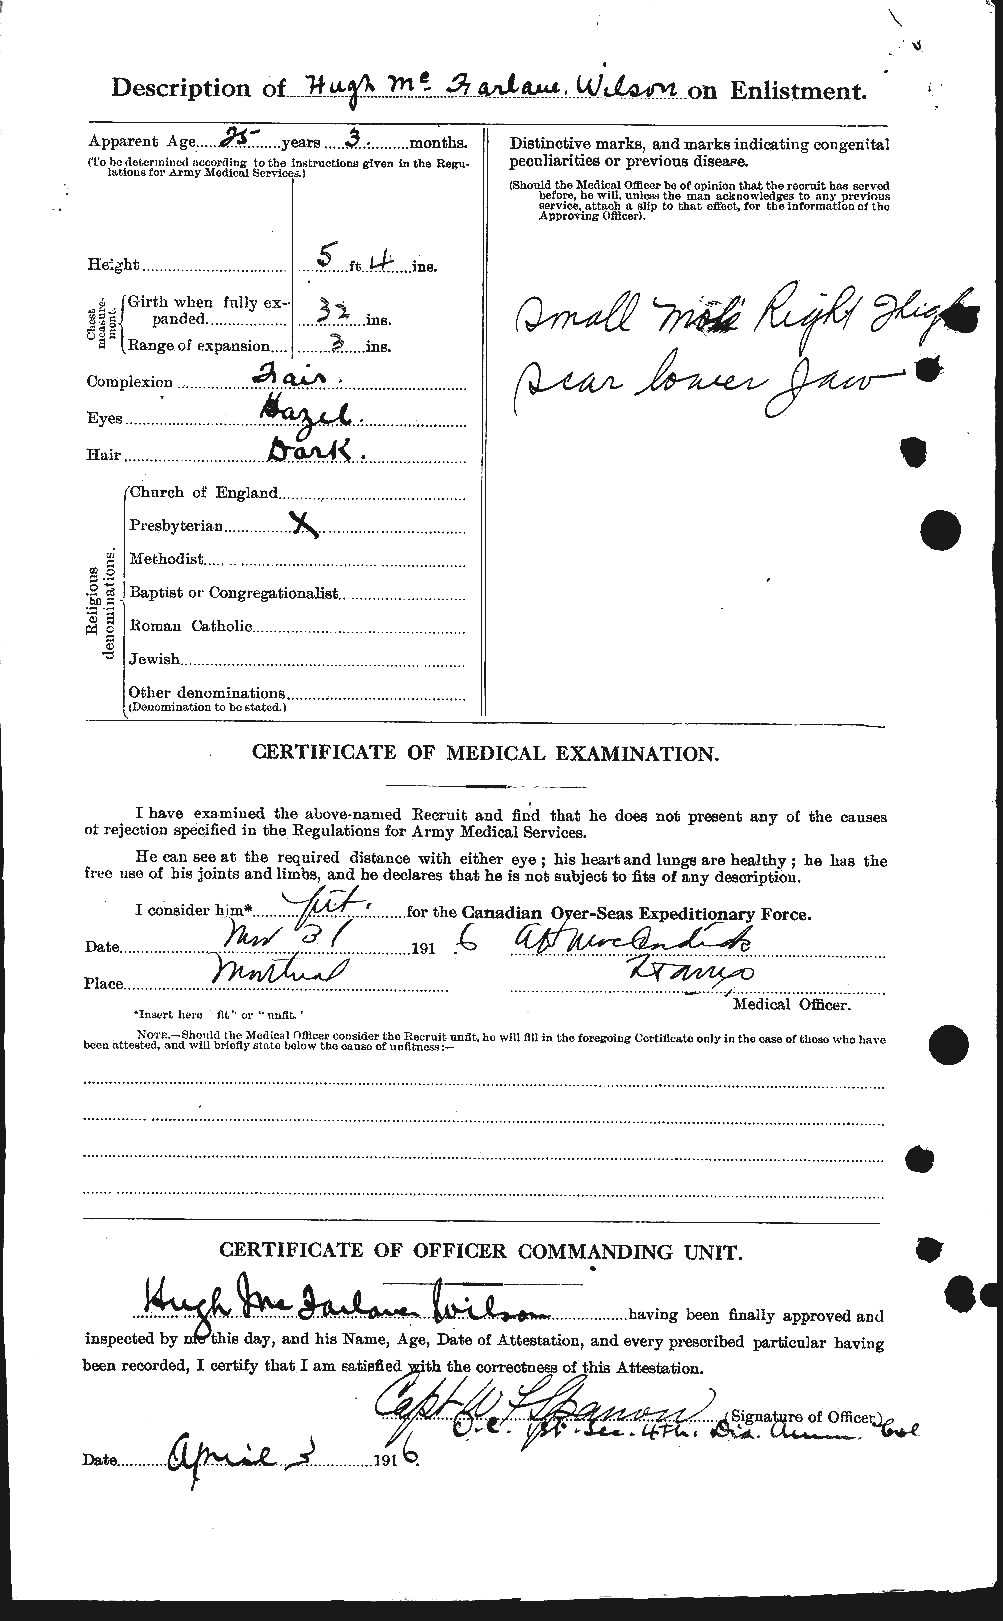 Personnel Records of the First World War - CEF 679618b